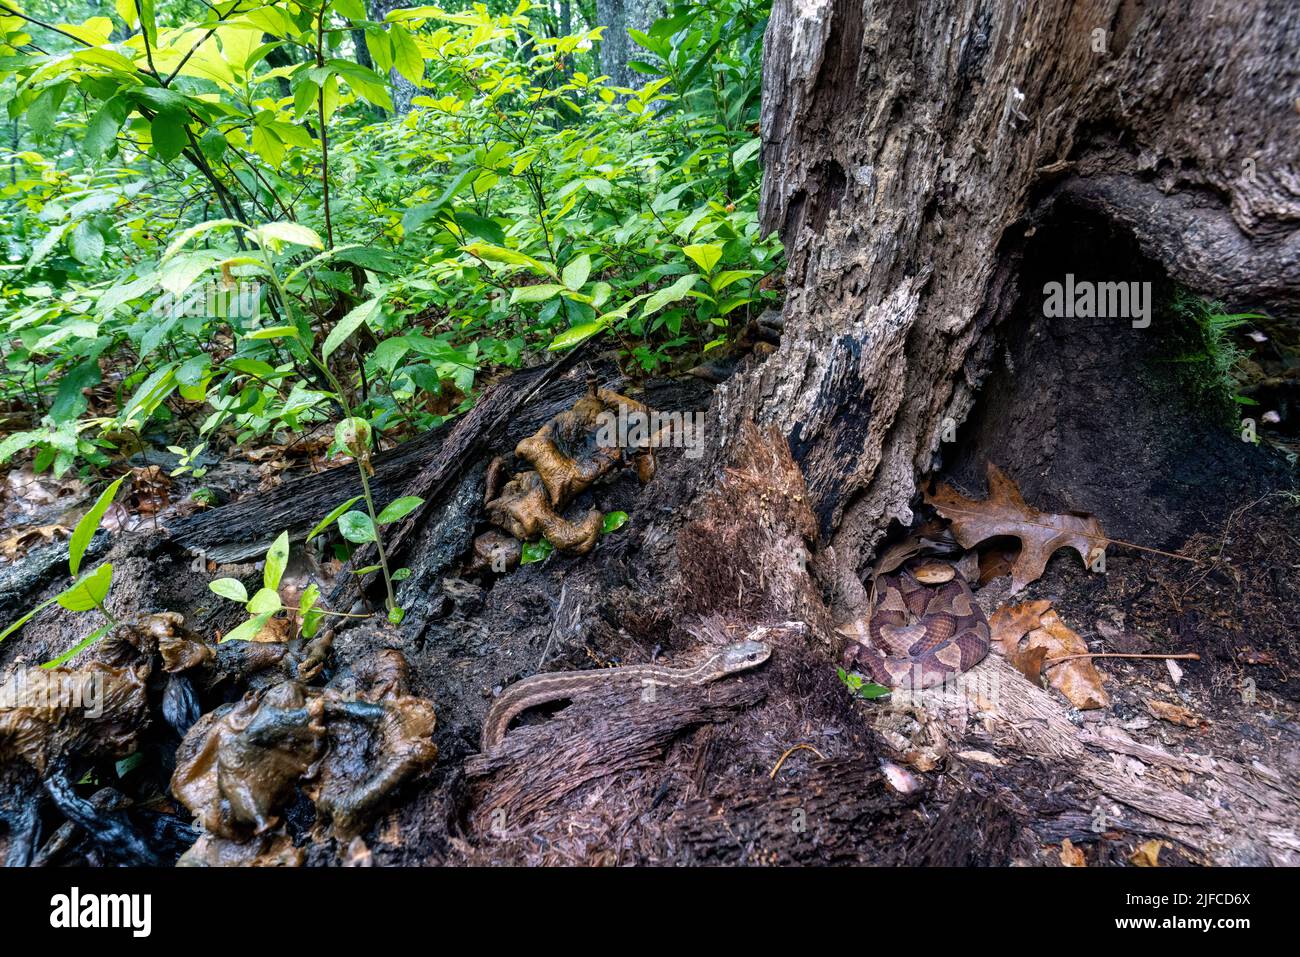 Eastern copperhead (Agkistrodon contortrix)  coiled in tree stump while an unsuspecting eastern garter snake (Thamnophis sirtalis sirtalis) approaches Stock Photo